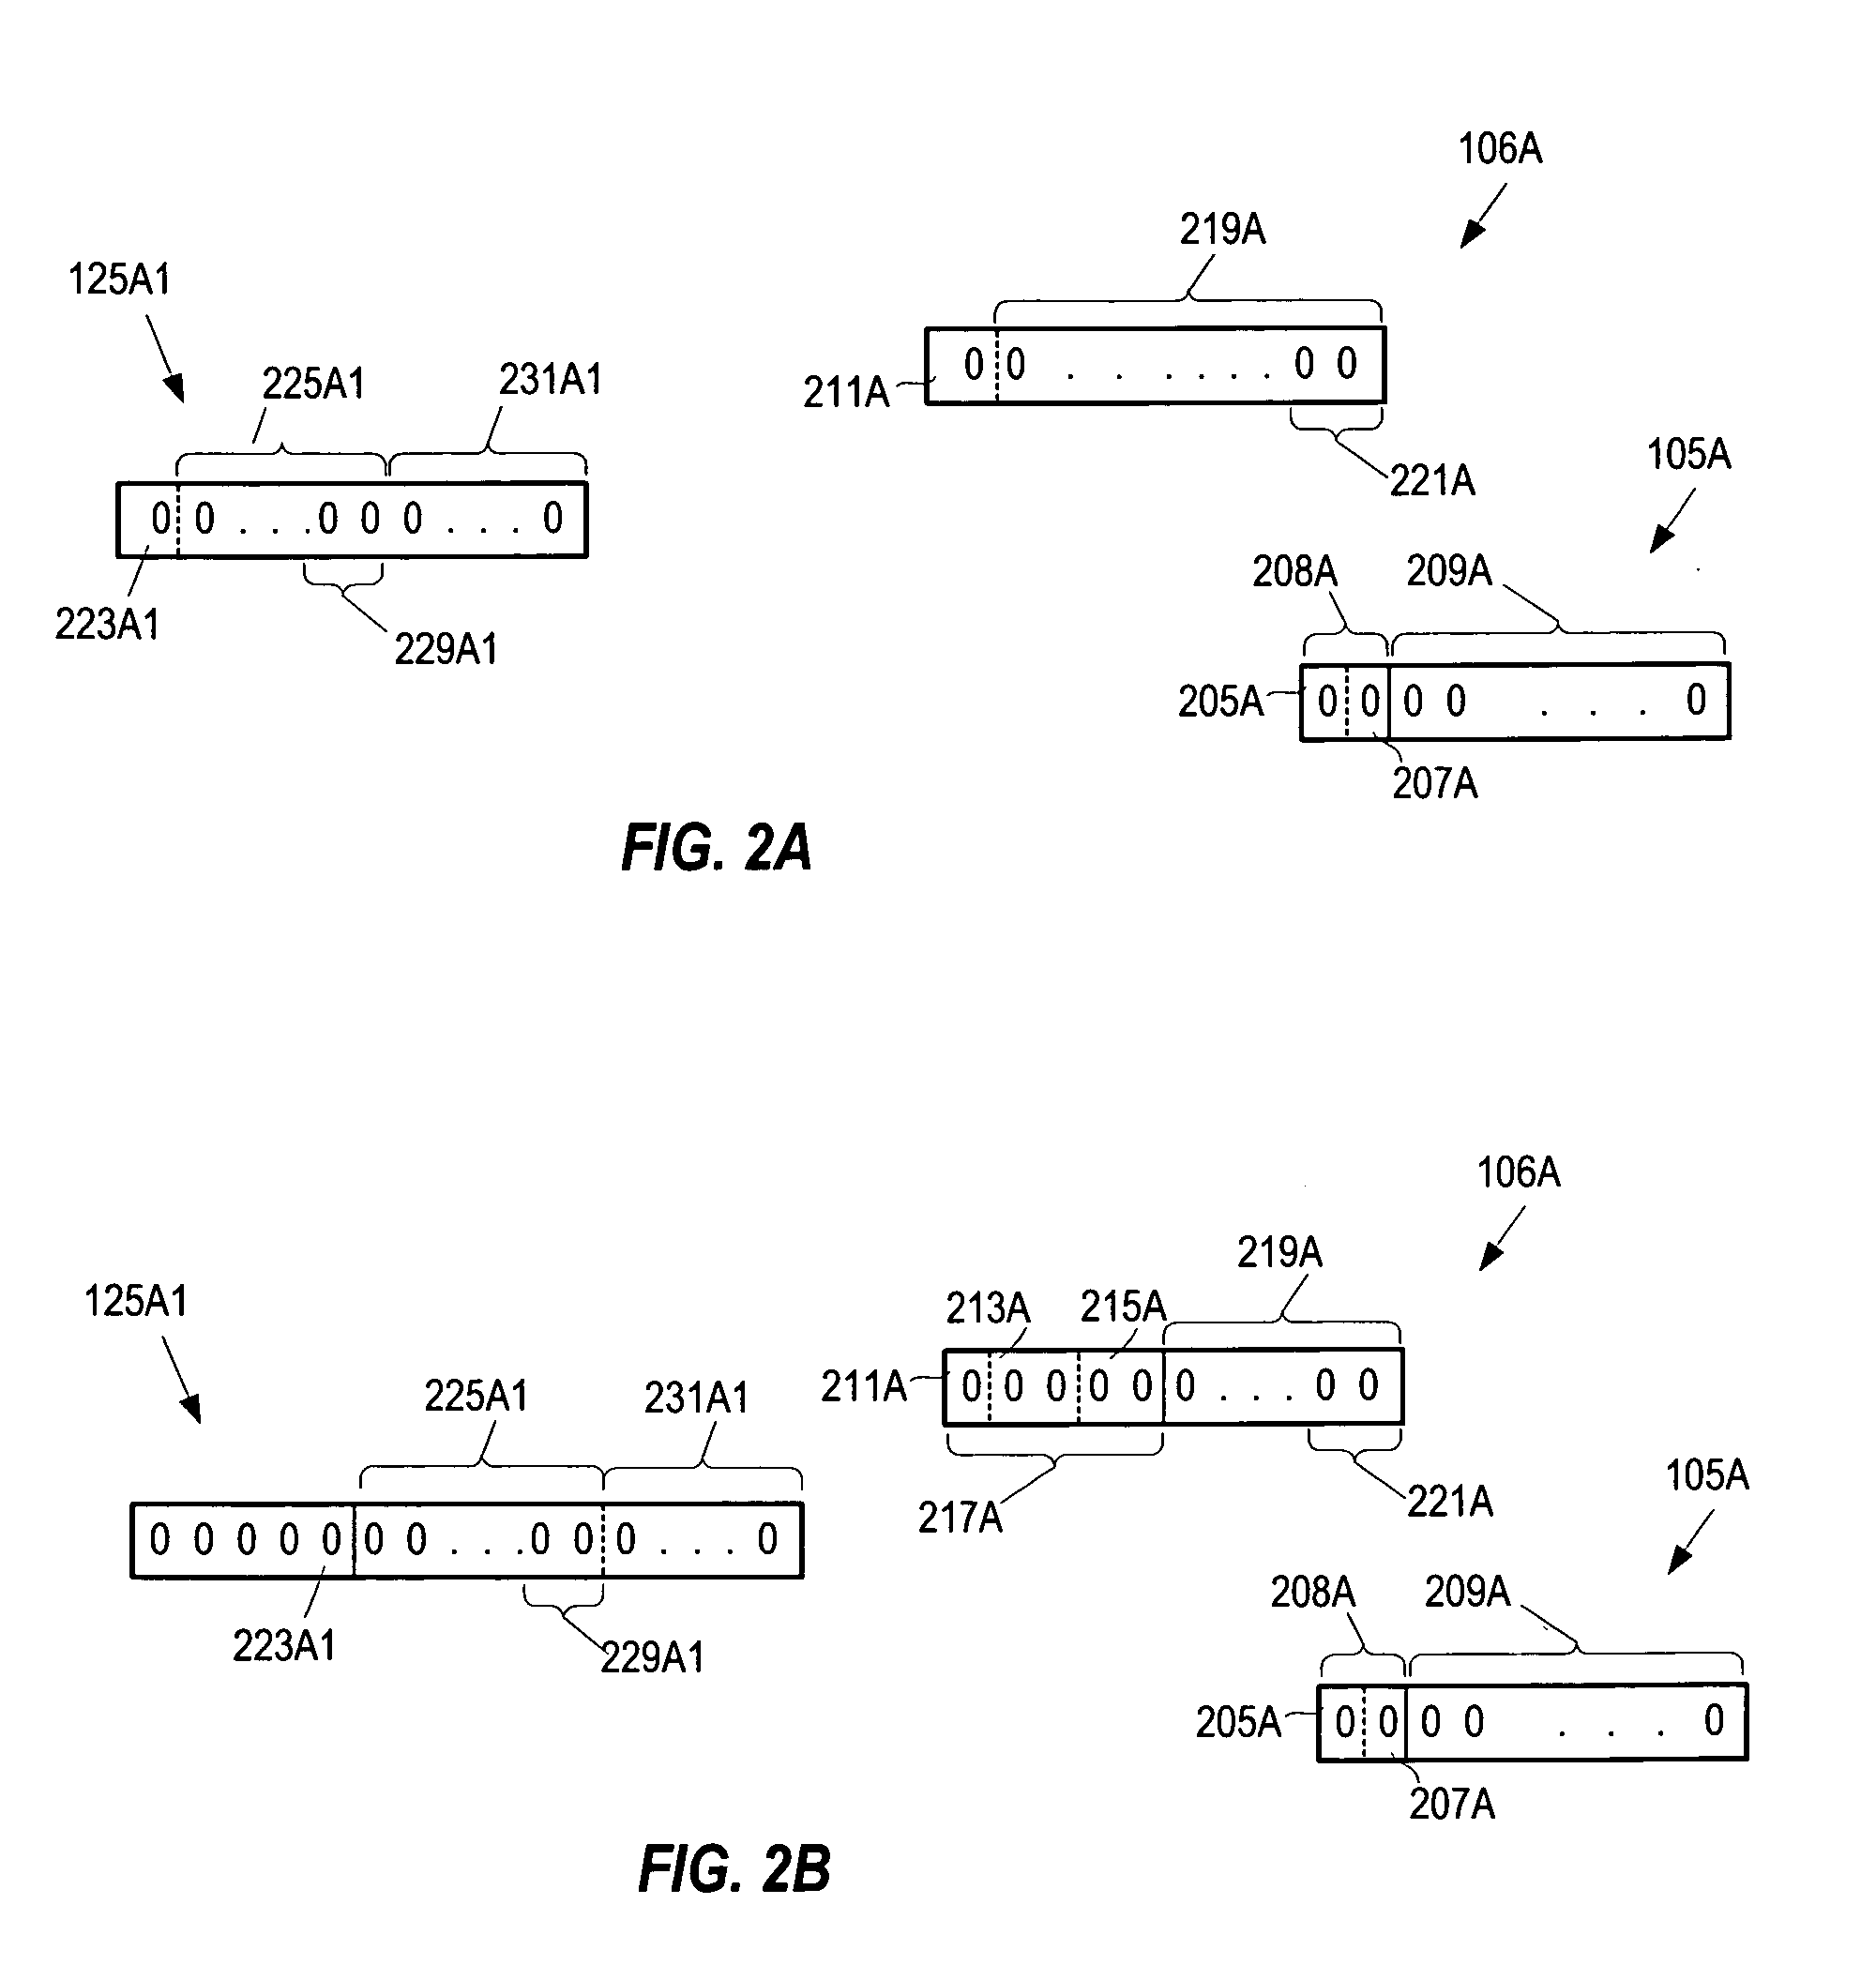 Method, apparatus and computer program product for efficient, large counts of per thread performance events